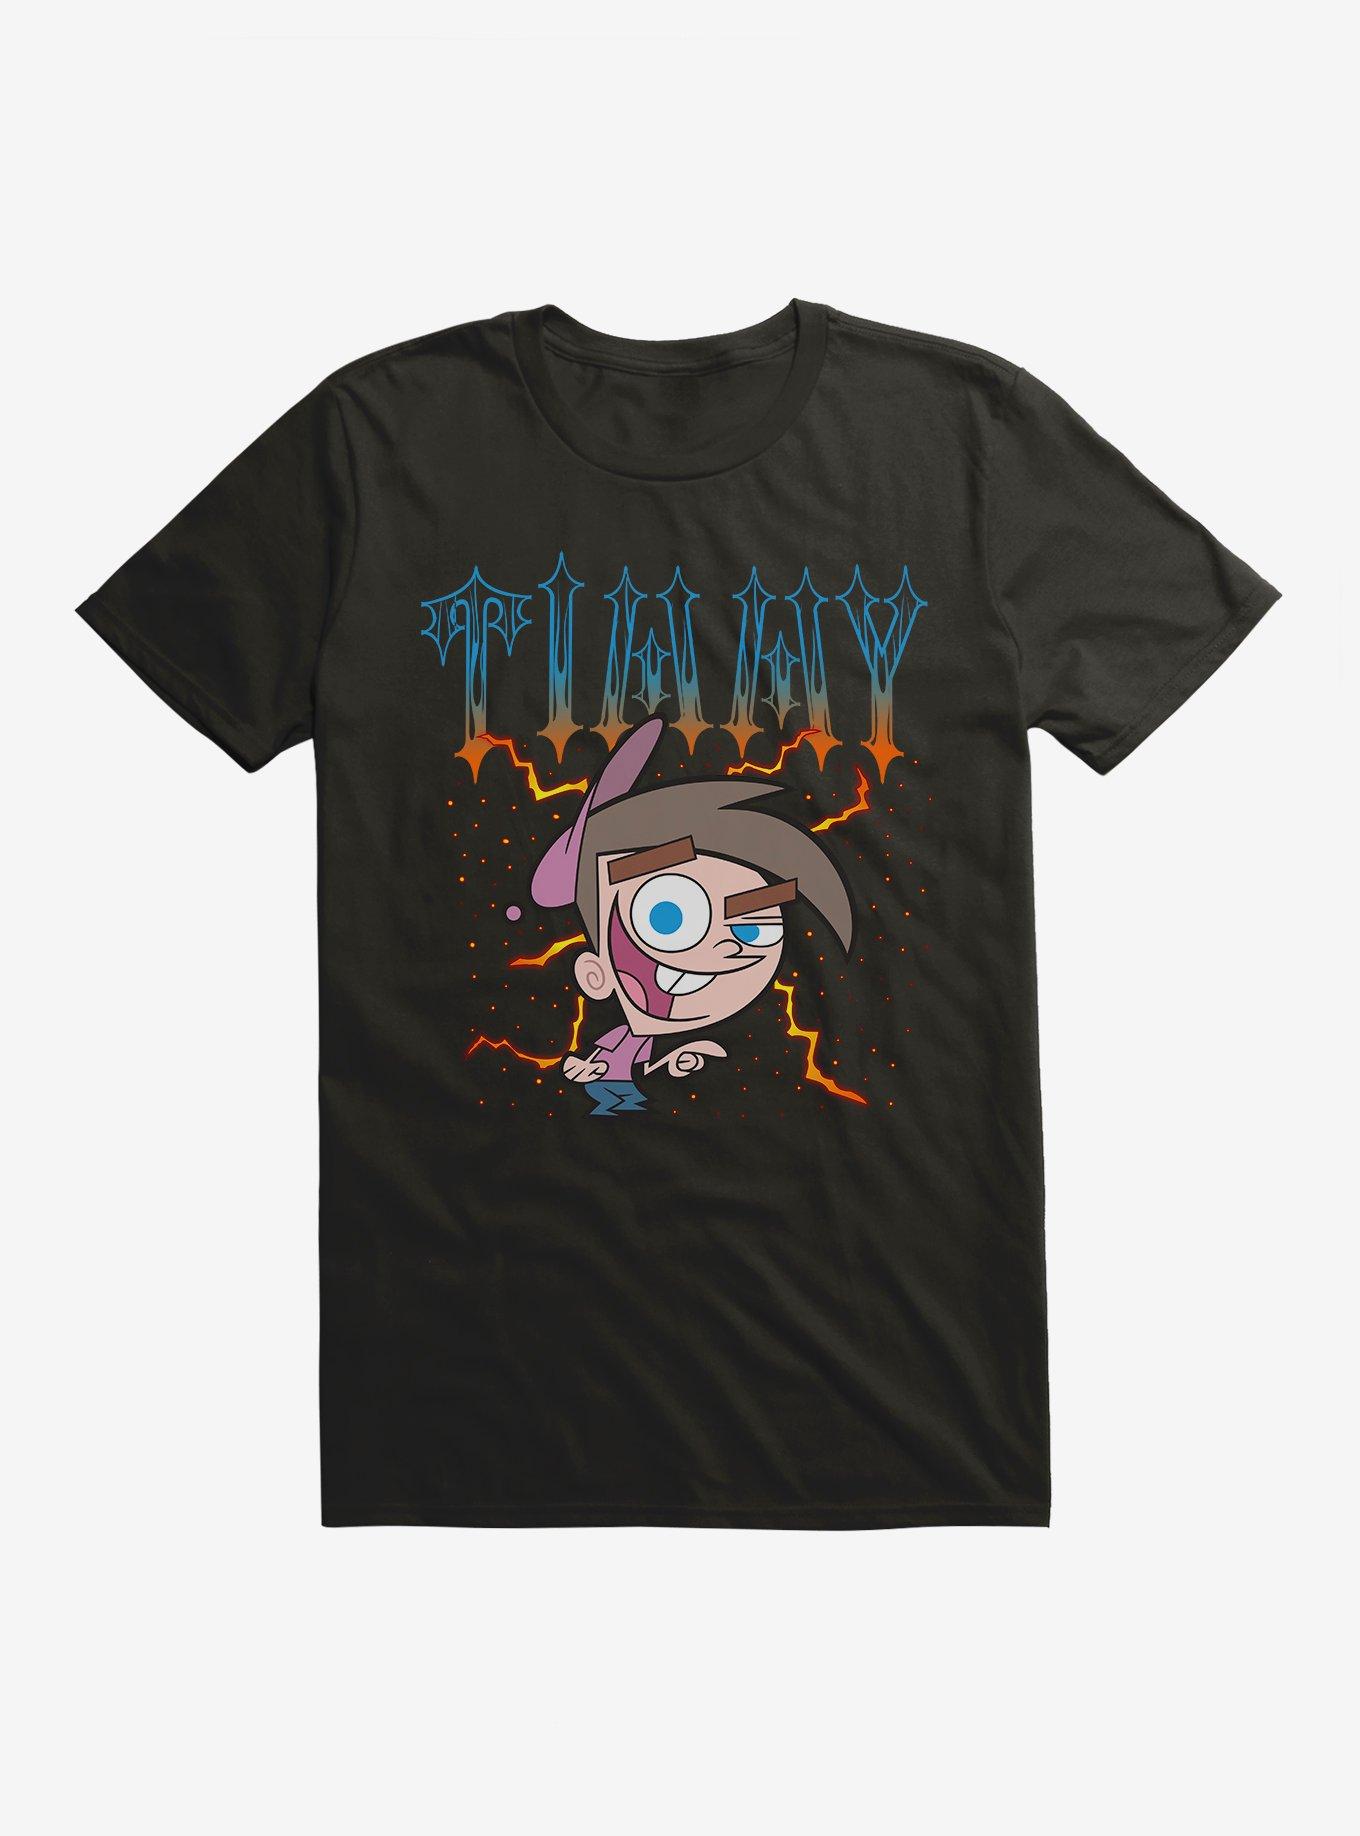 The Fairly Oddparents Timmy Turner T-Shirt